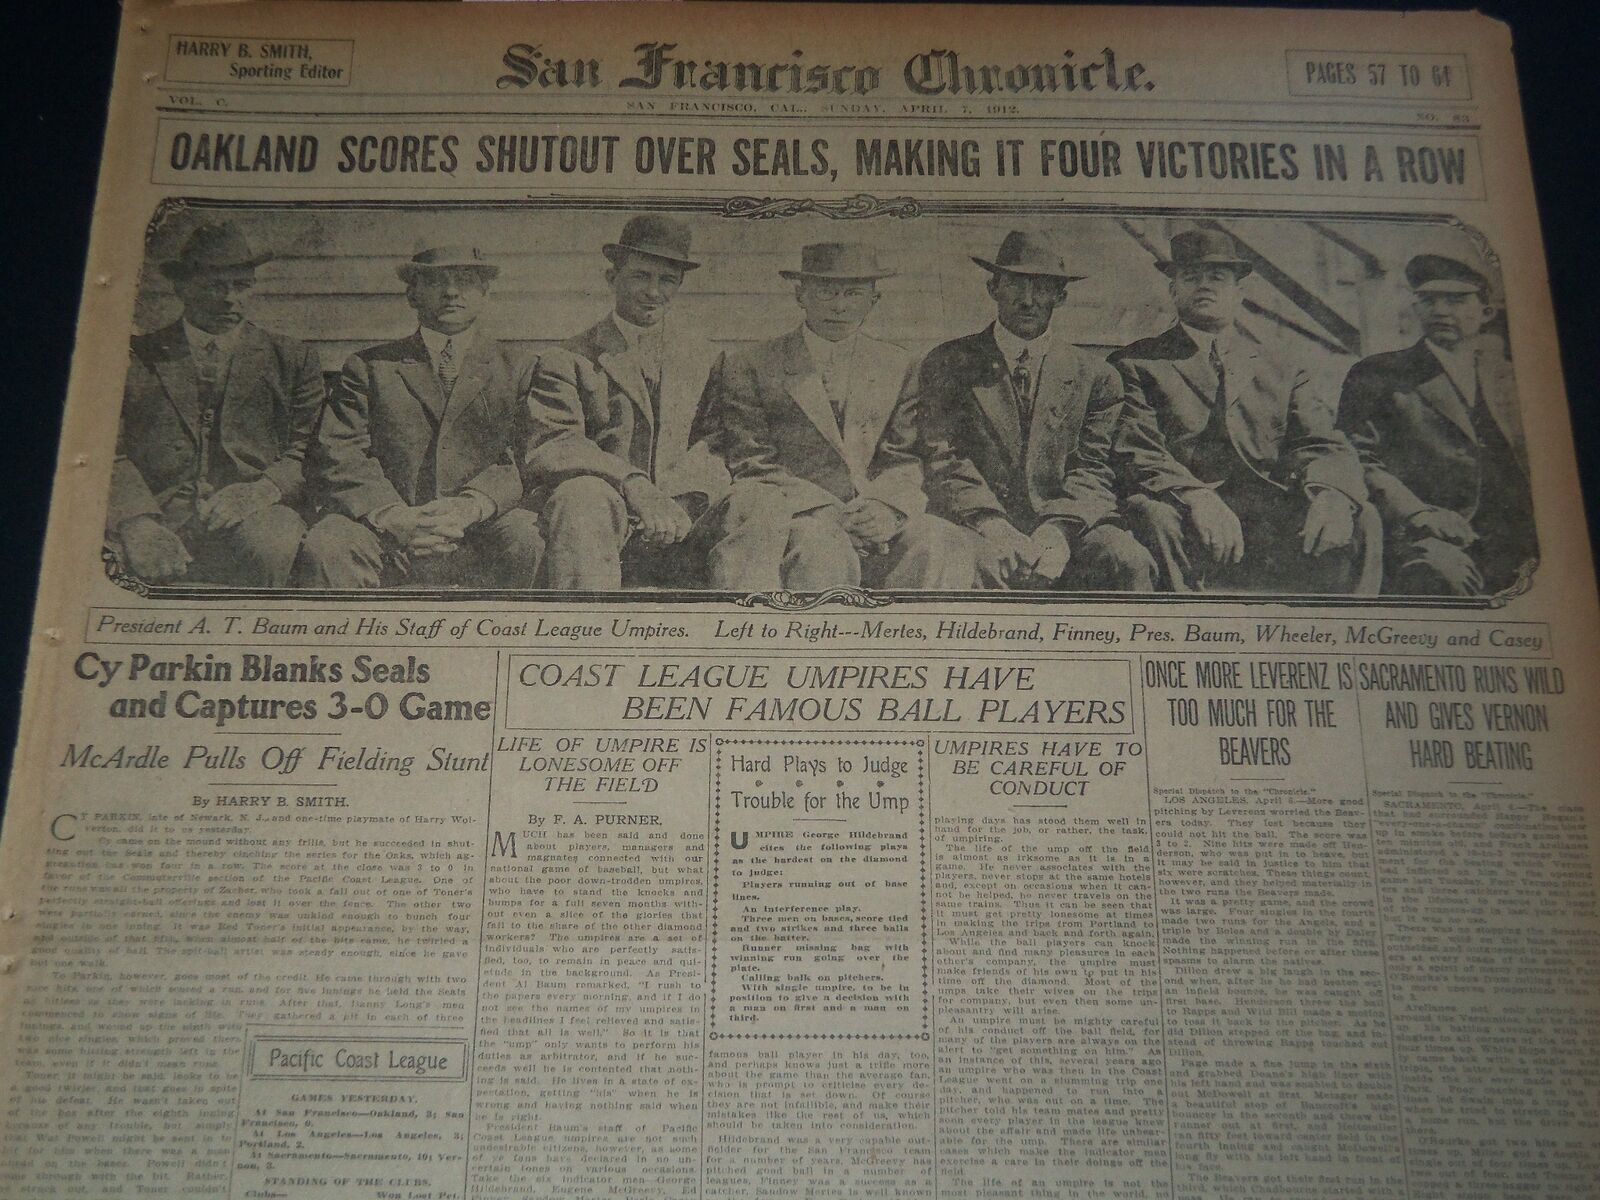 1912 APRIL 7 SAN FRANCISCO CHRONICLE SUNDAY SPORTS SECTION - NT 7610